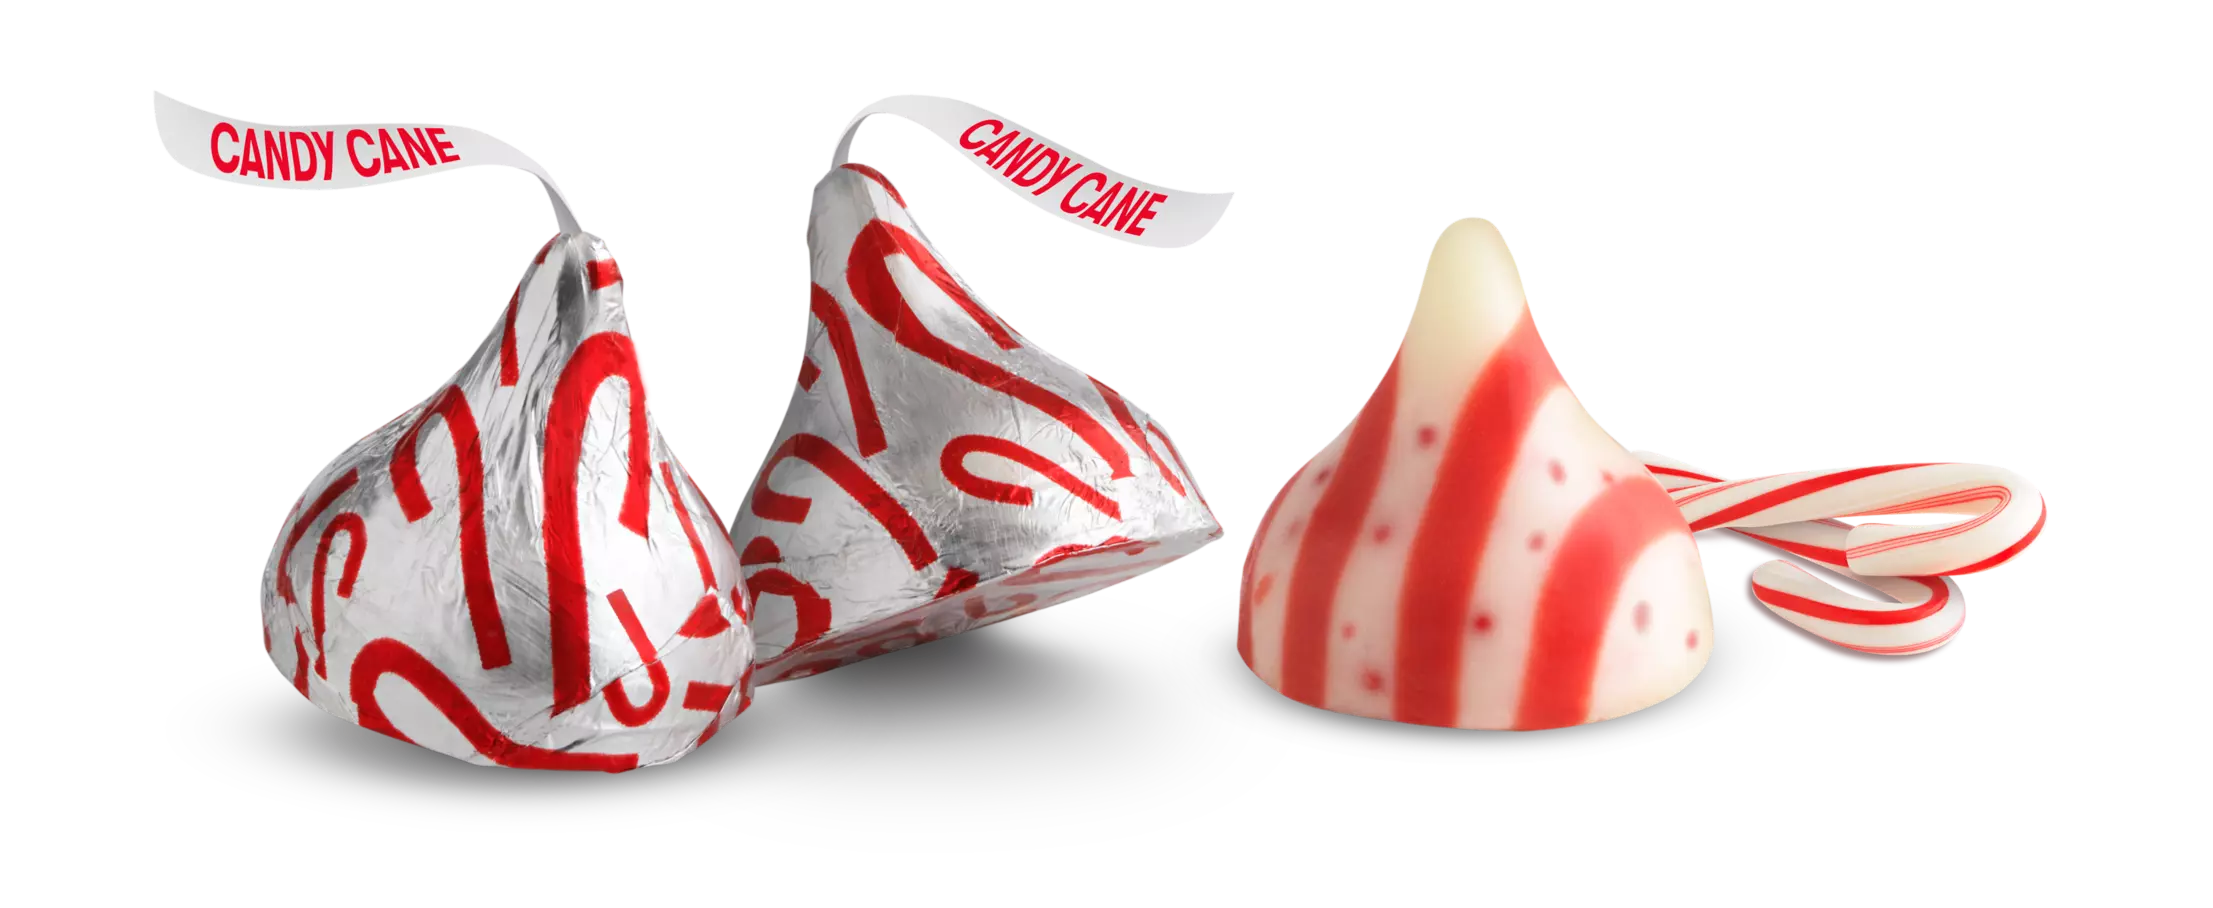 HERSHEY'S KISSES Candy Cane Mint Candy, 2.08 oz cane - Out of Package